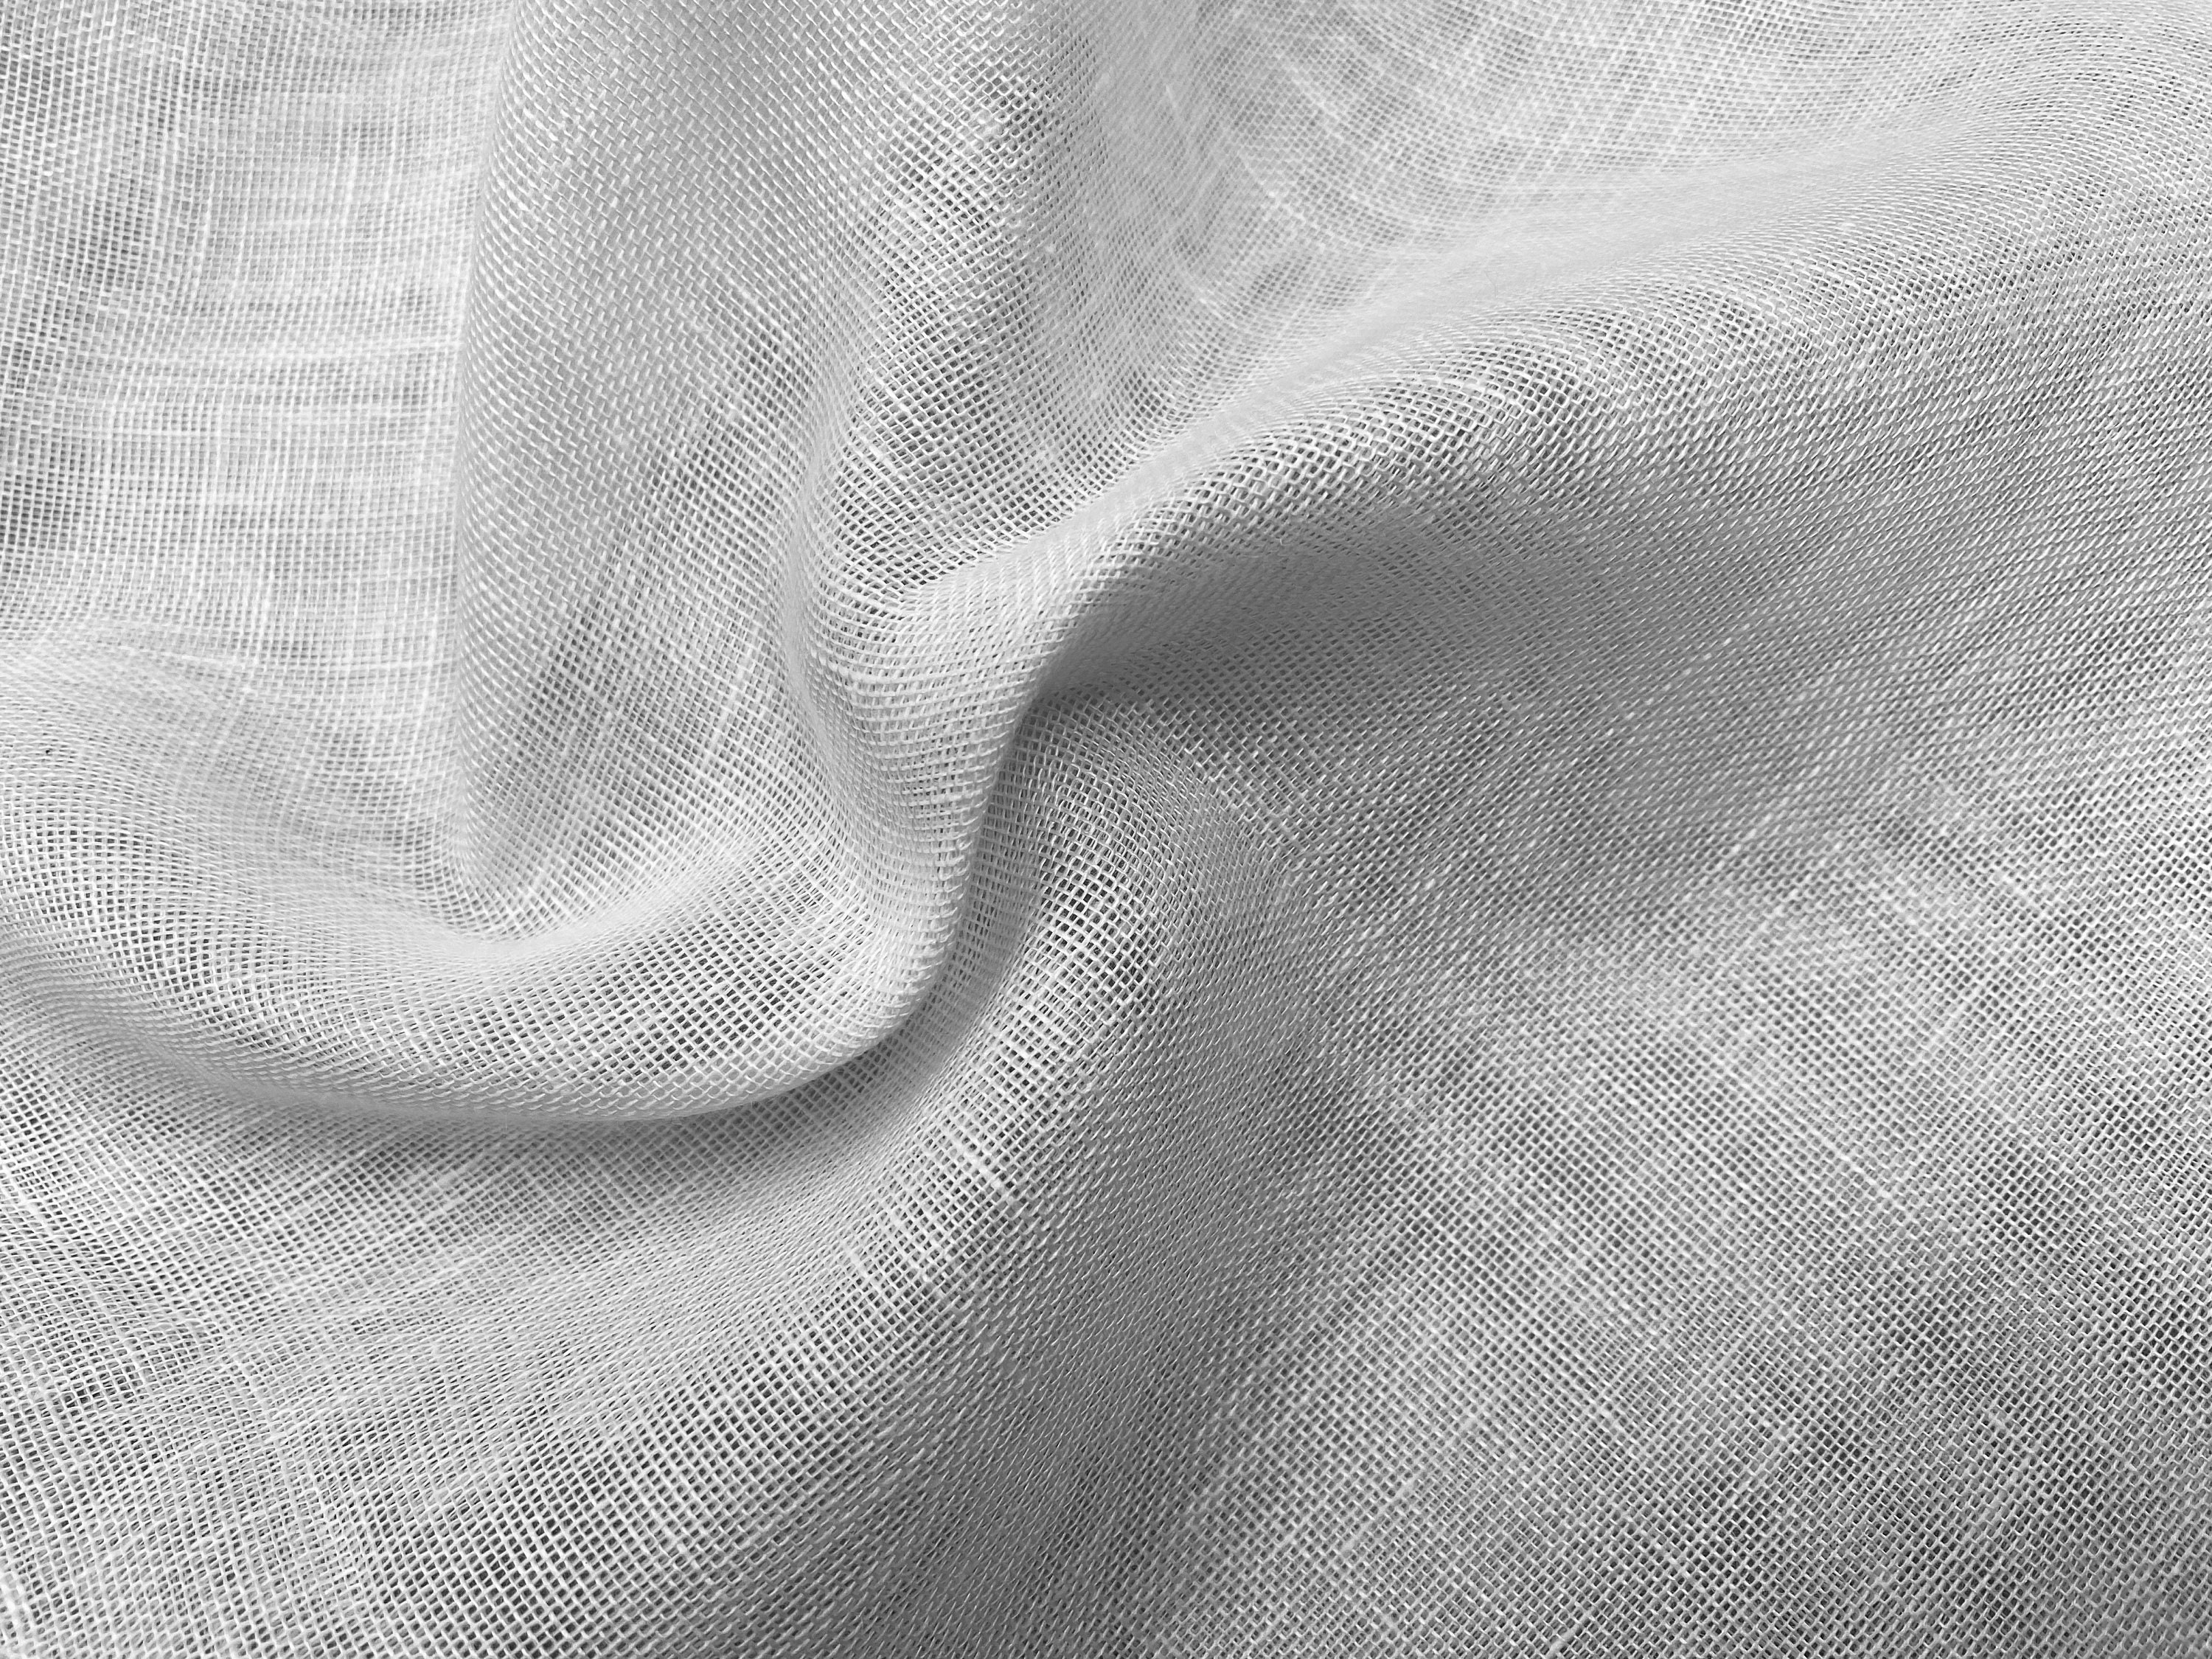 Extra Wide 100% Linen Fabric - Soft Linen Material for Home Decor,  Curtains, Clothes - 118/ 300cm wide - Plain CREAM - Lush Fabric